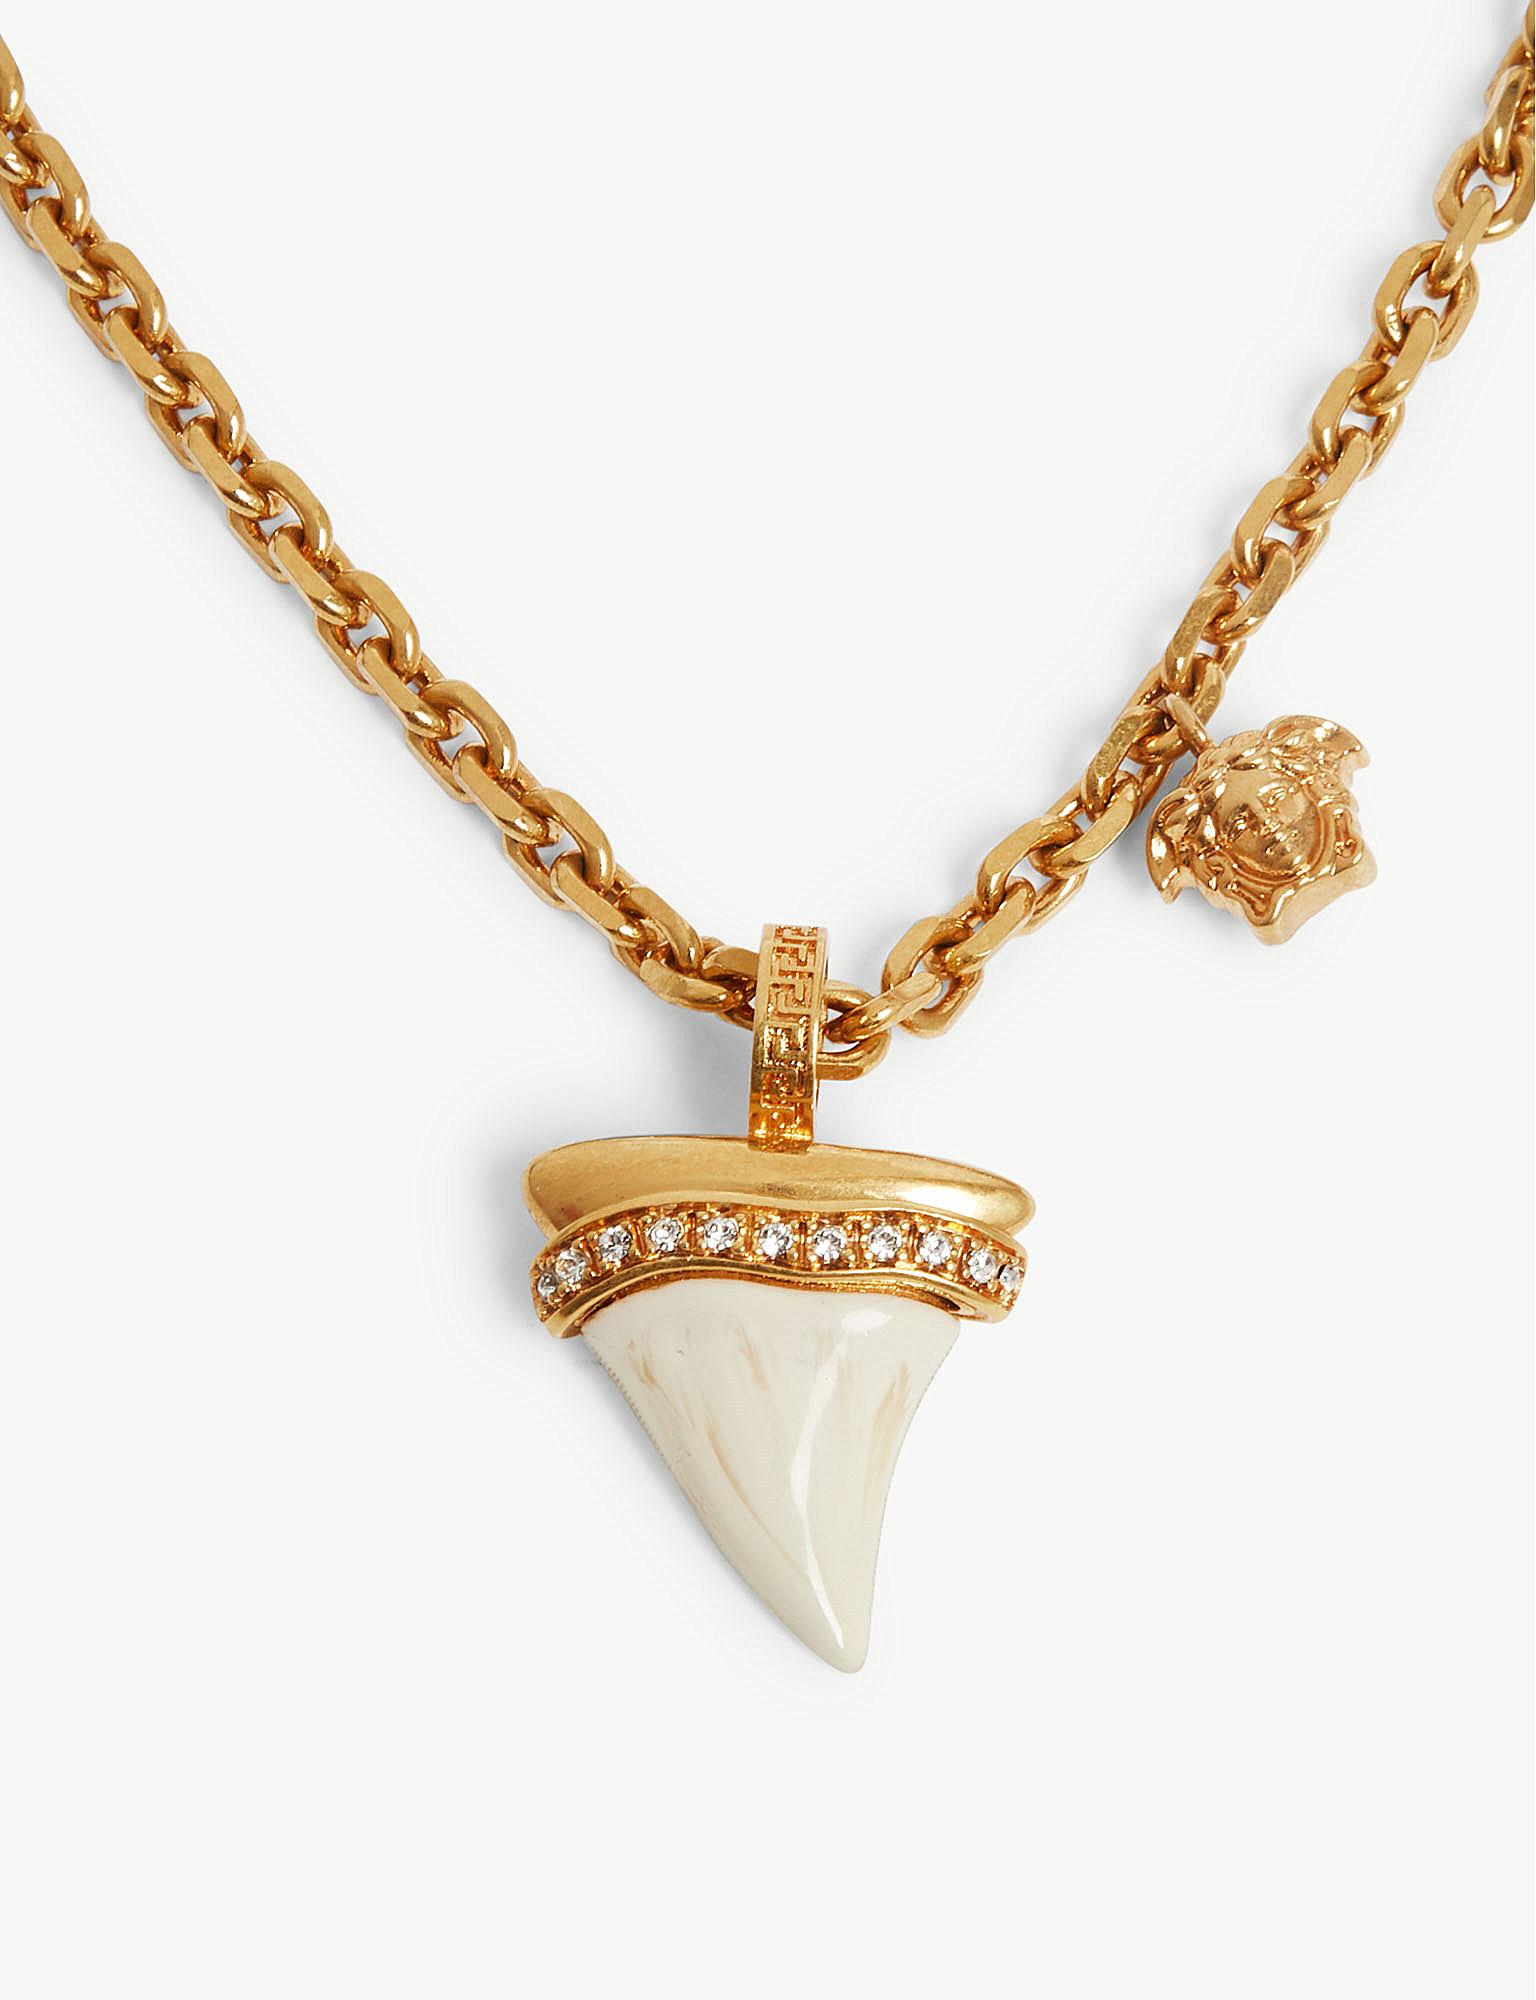 Versace Shark Tooth Chain Necklace in 